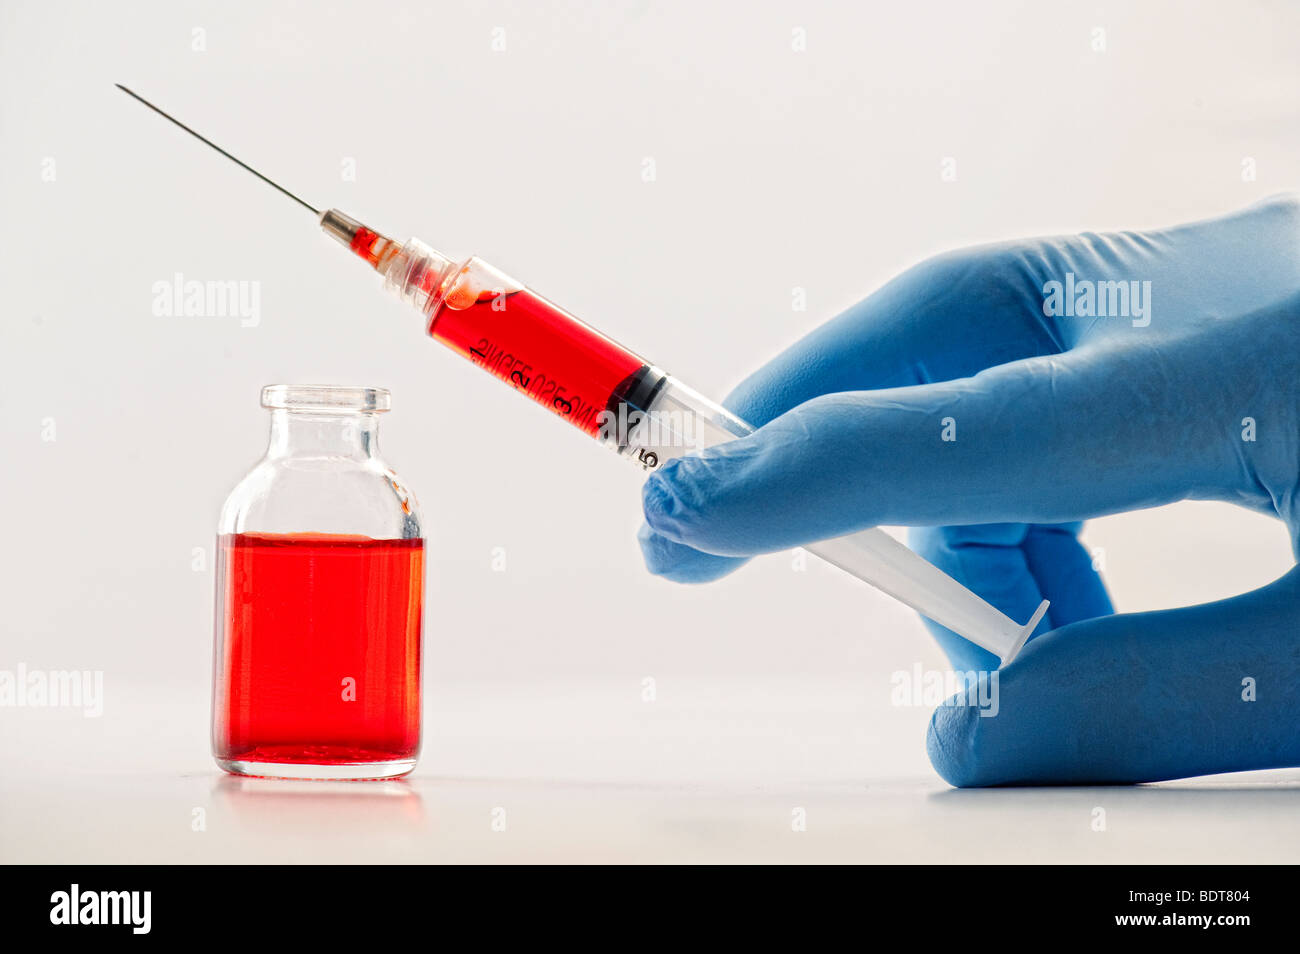 gloved hand holding hypodermic needle and vial Stock Photo